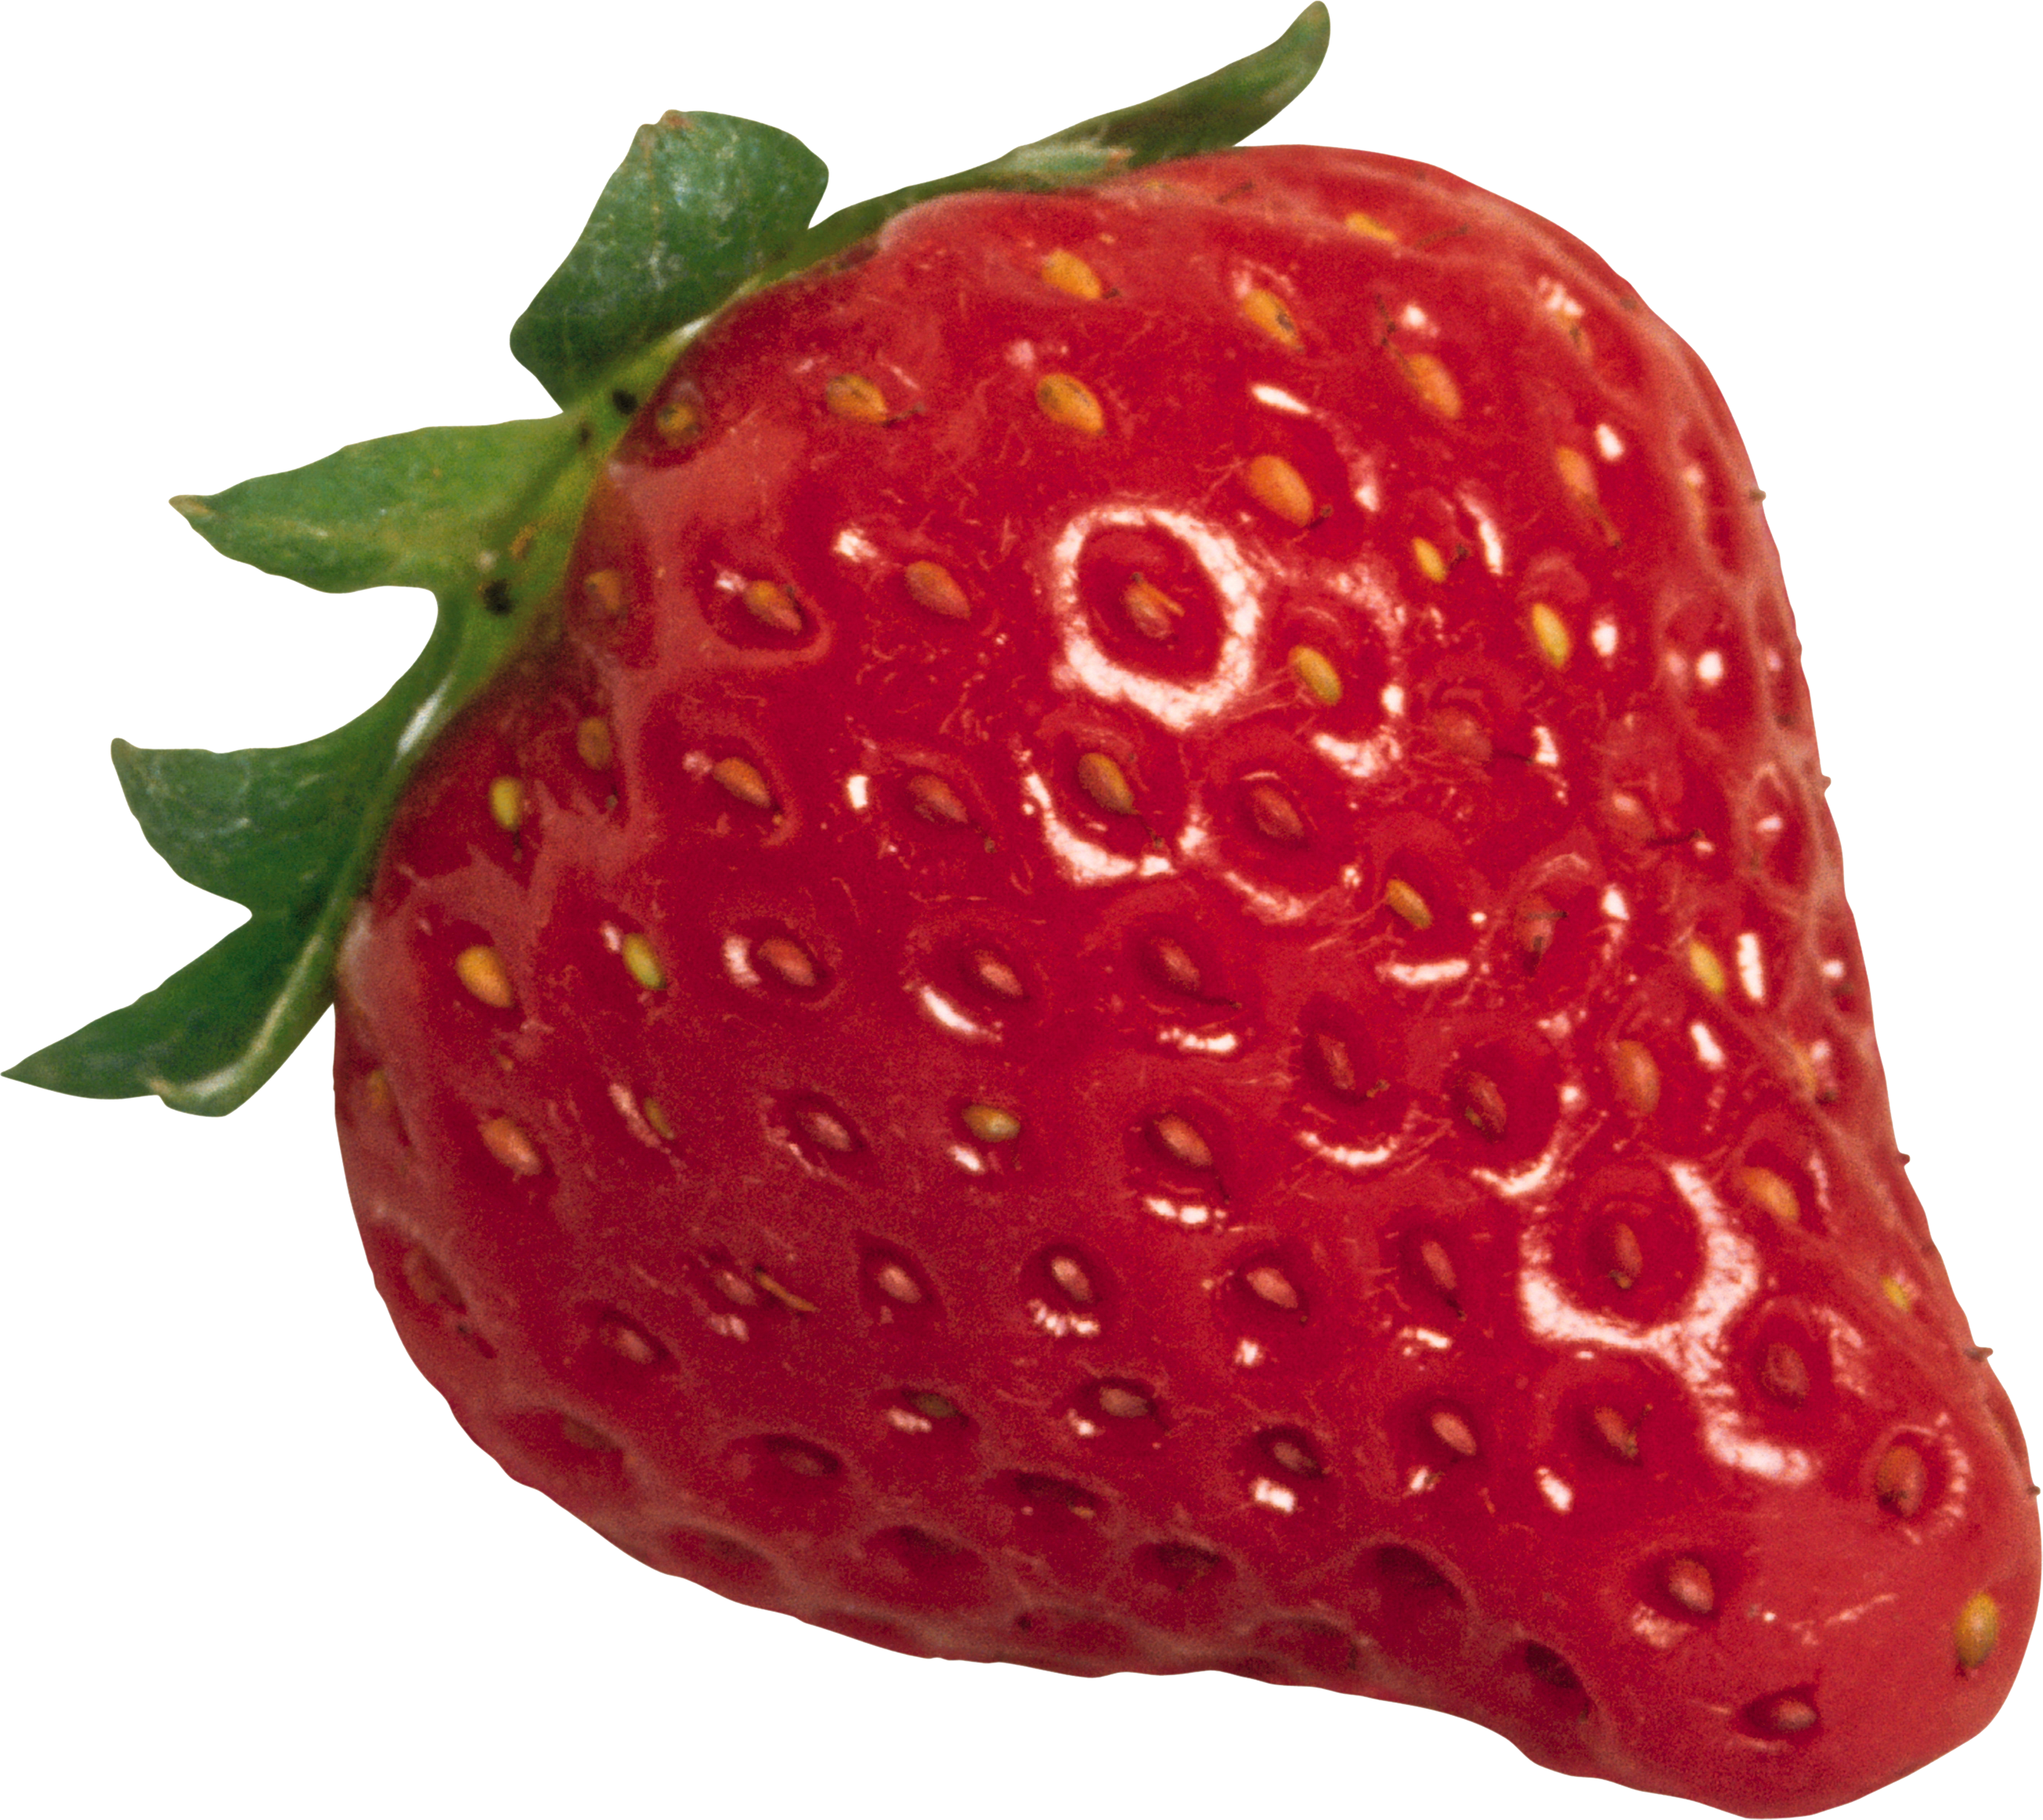 Strawberry PNG image with transparent background